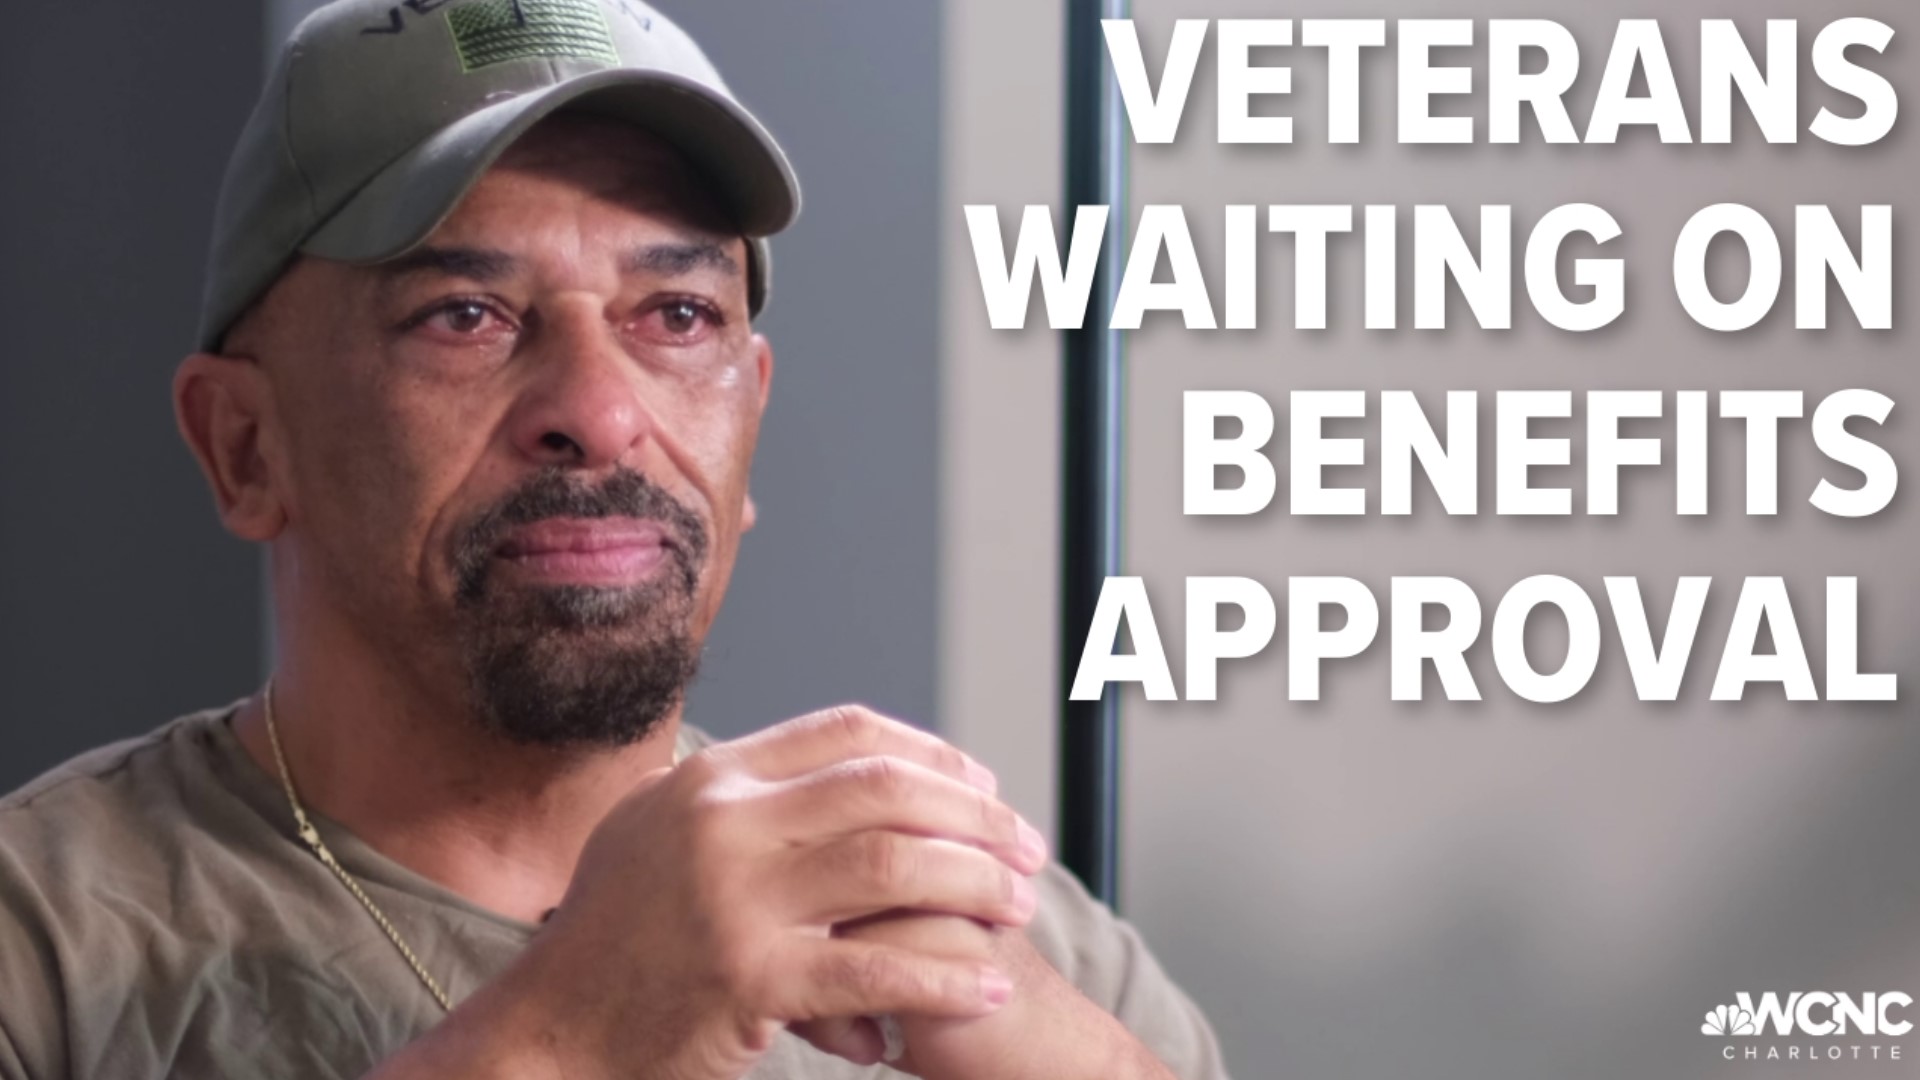 Despite major progress reducing its benefit appeals backlog, the number of pending VA appeals has increased in recent years. There are 200,000 undecided cases.